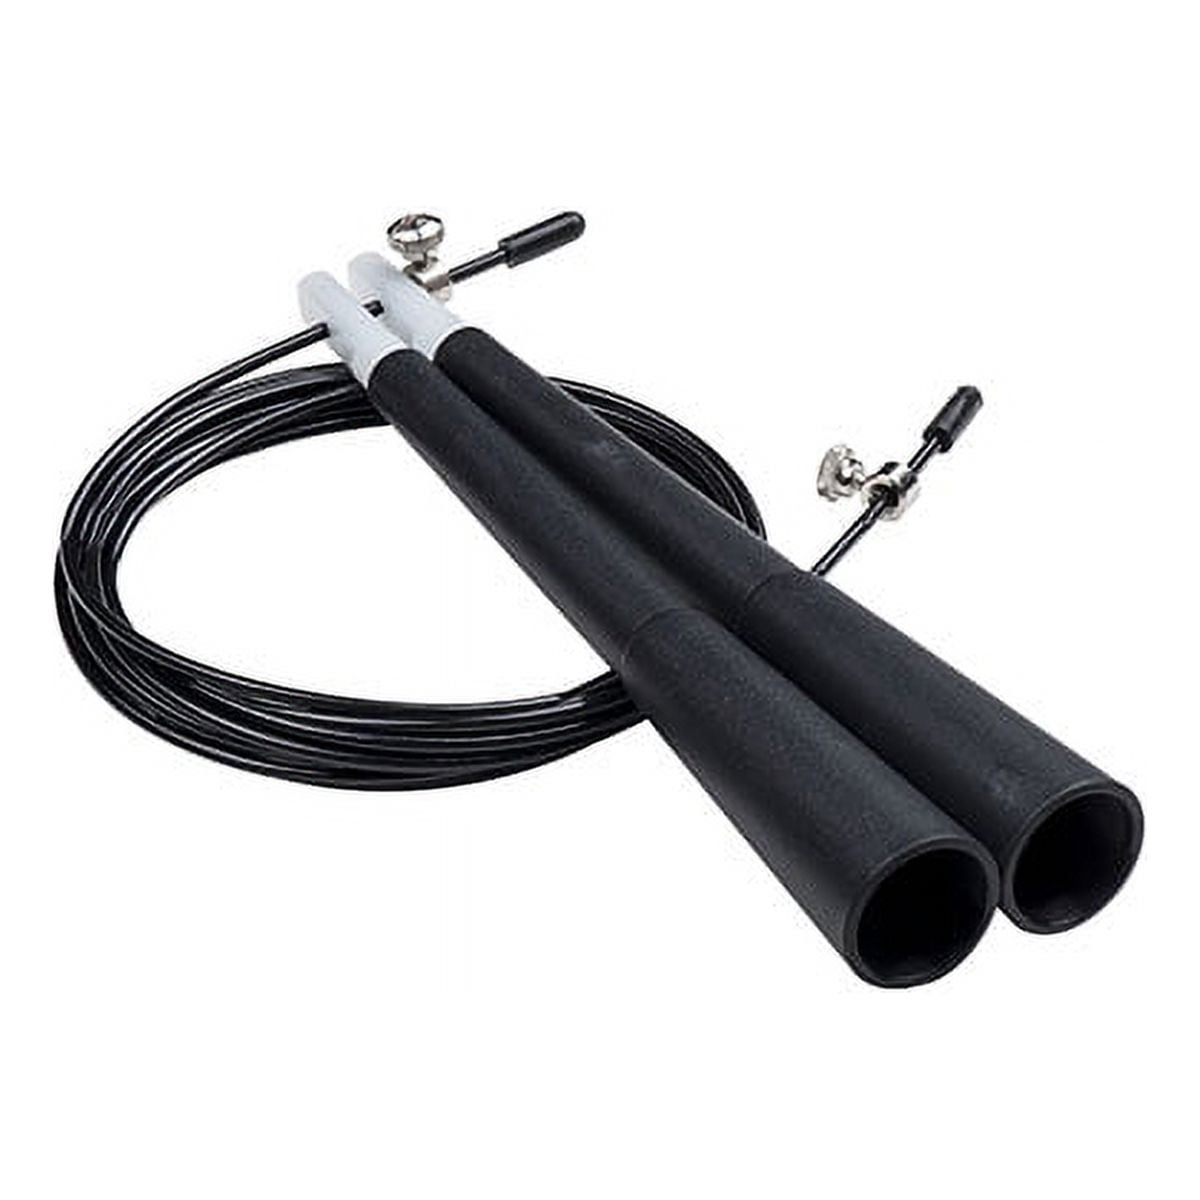 Picture of Champion Sports XRJ9BK Double Bearing Speed Jump Rope, Black